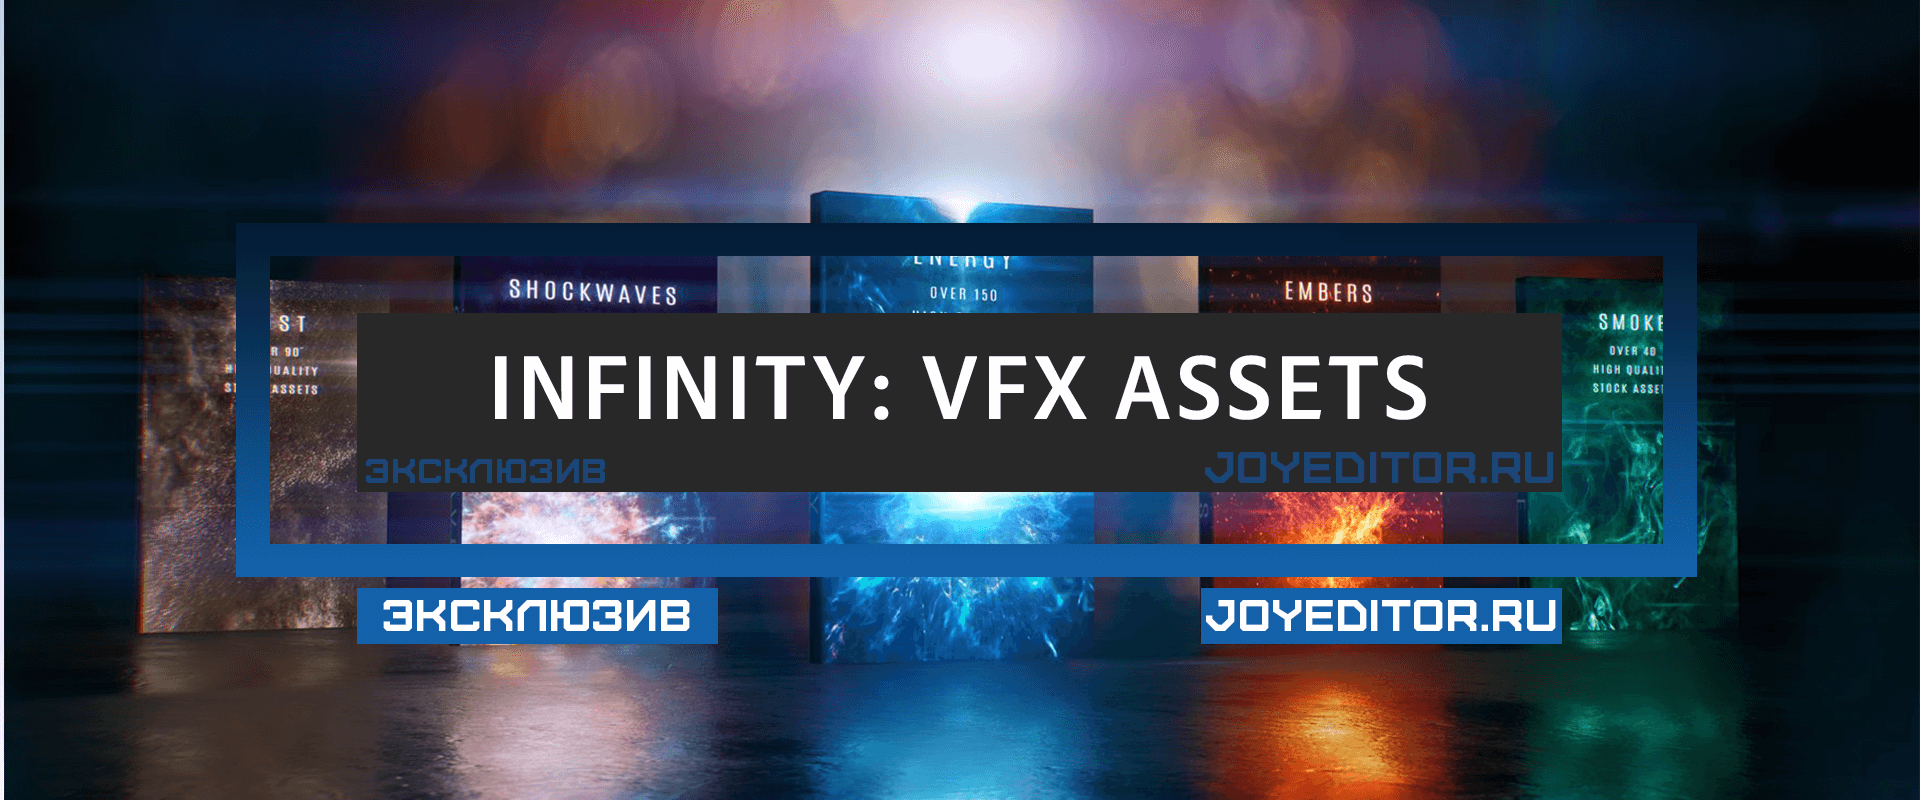 INFINITY VFX ASSETS COLLECTION